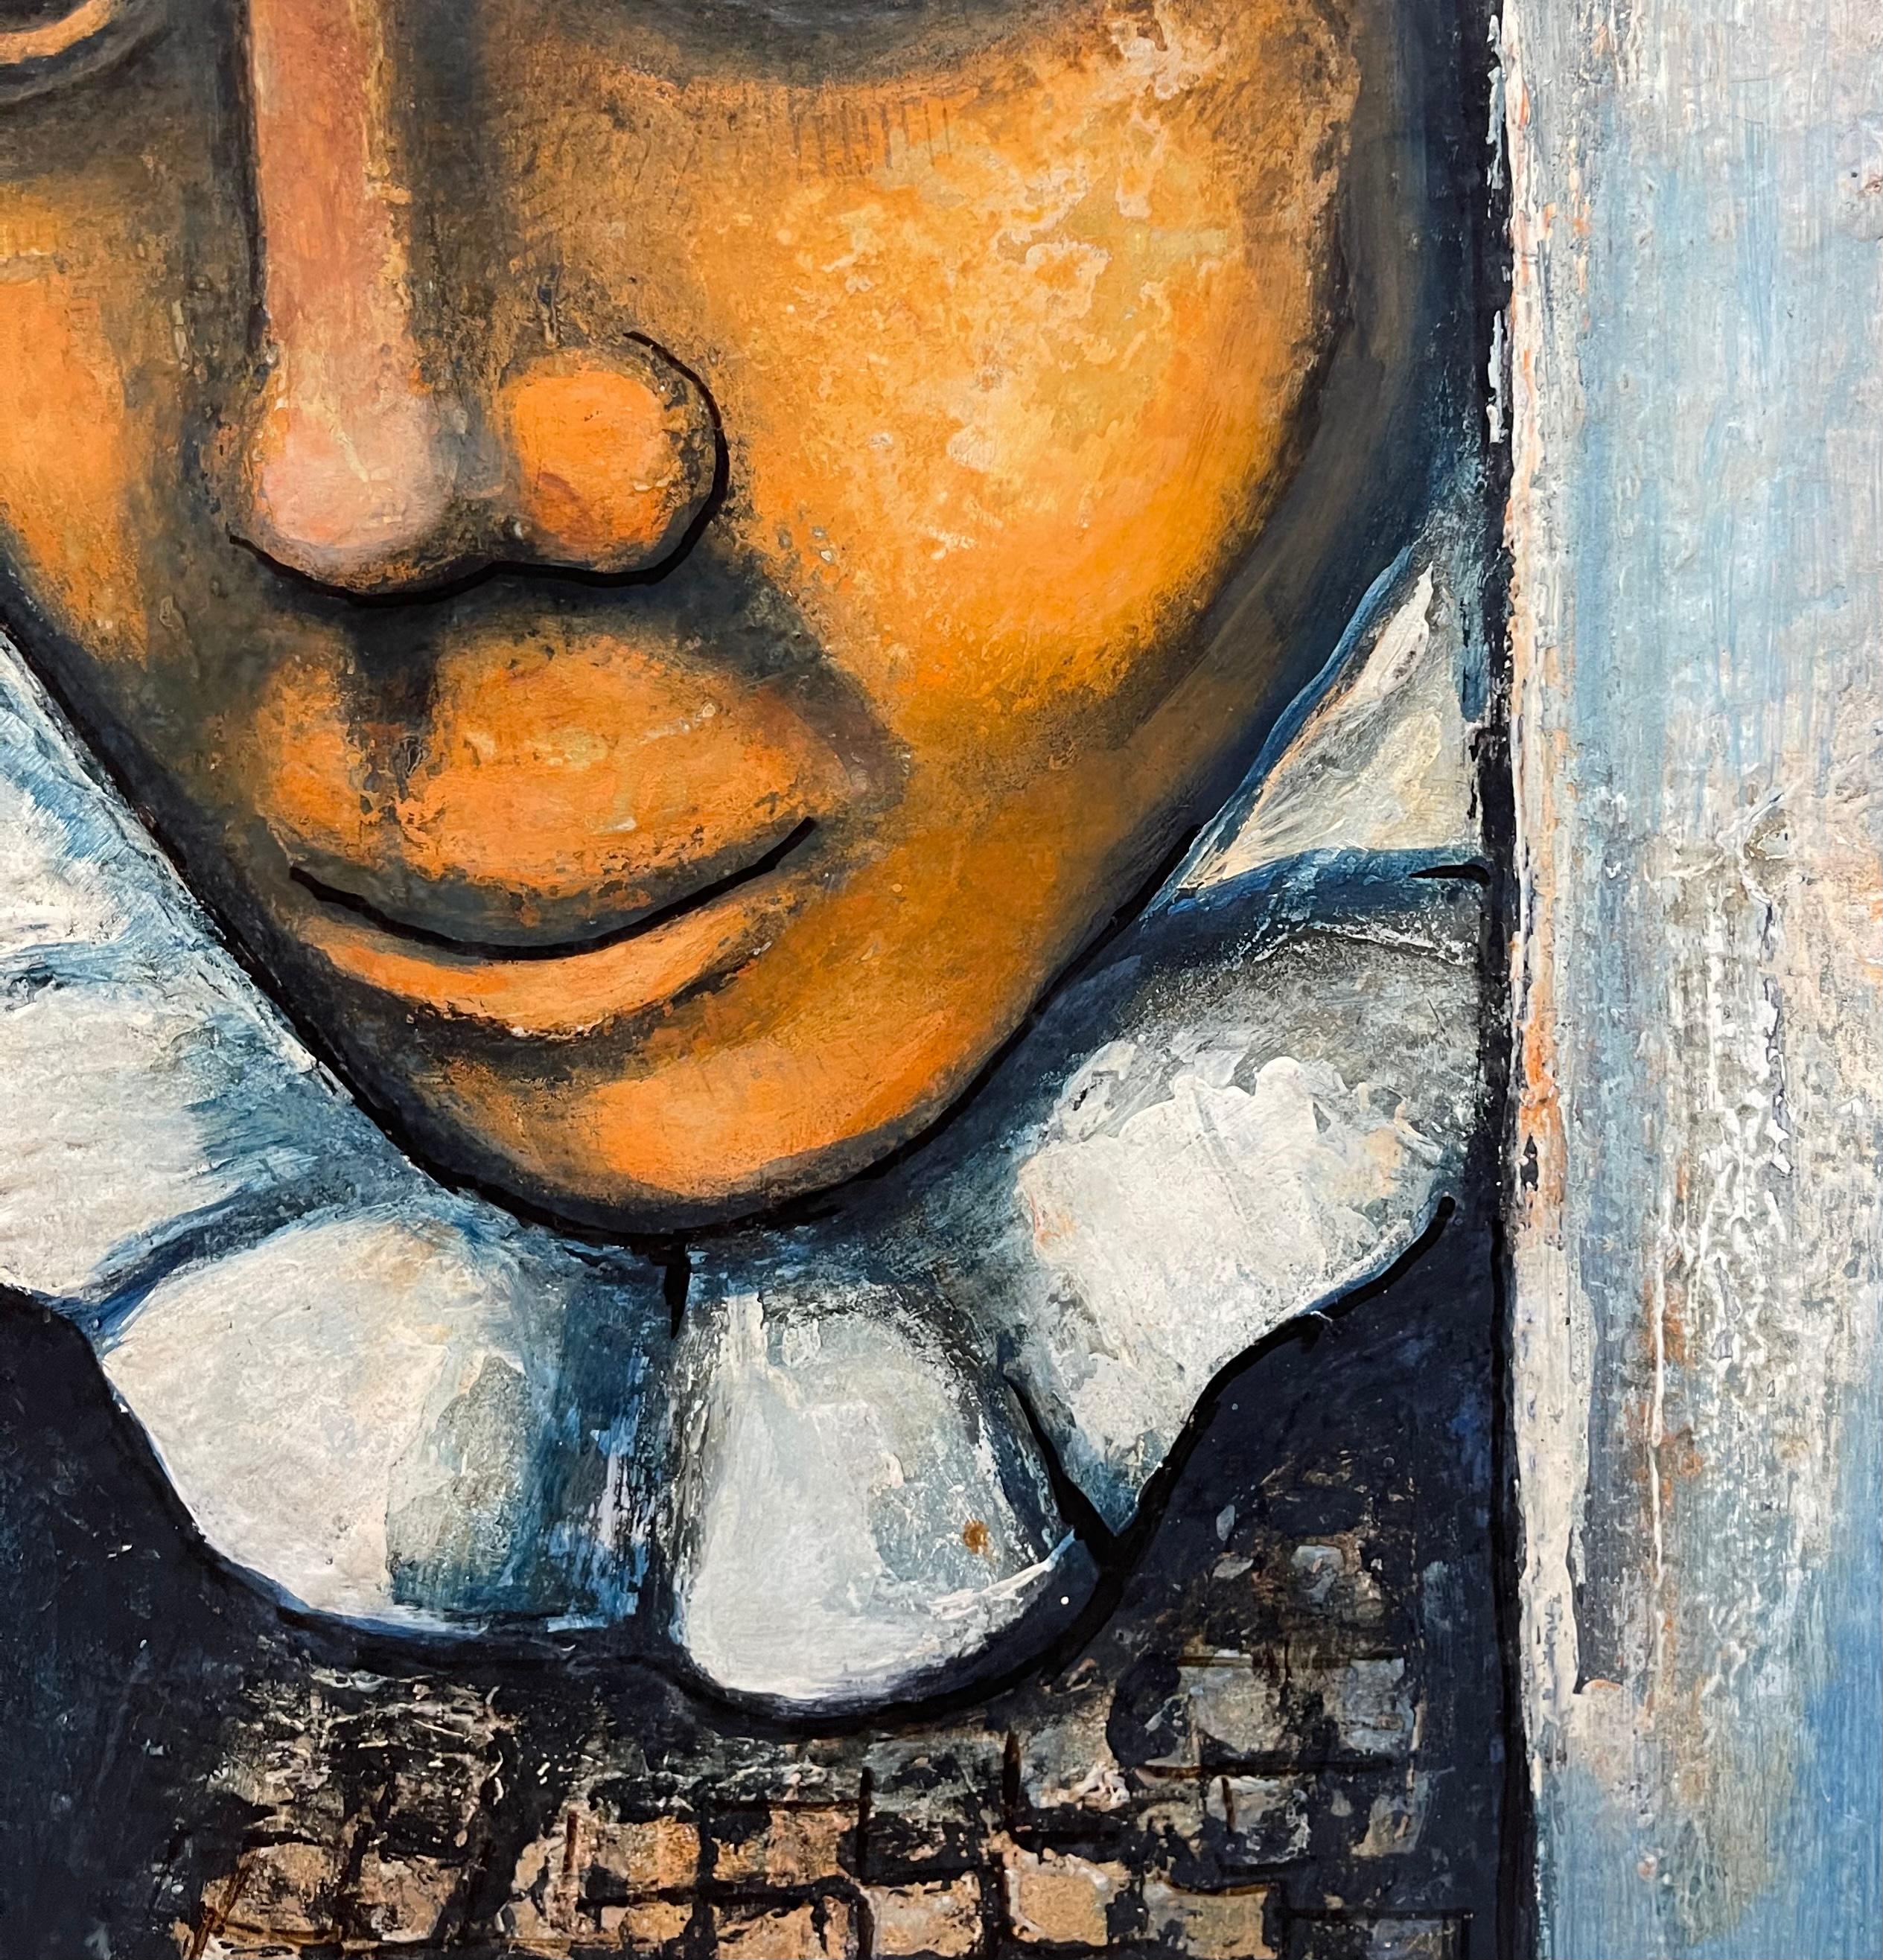 Up for sale is a wonderful modernist portrait oil painting of a Harlequin by the Famous African American artist Charles Sebree 1914-1985 

Sebree is one of the most important emerging artist from the Chicago Black Art Movement of the 1930’s and